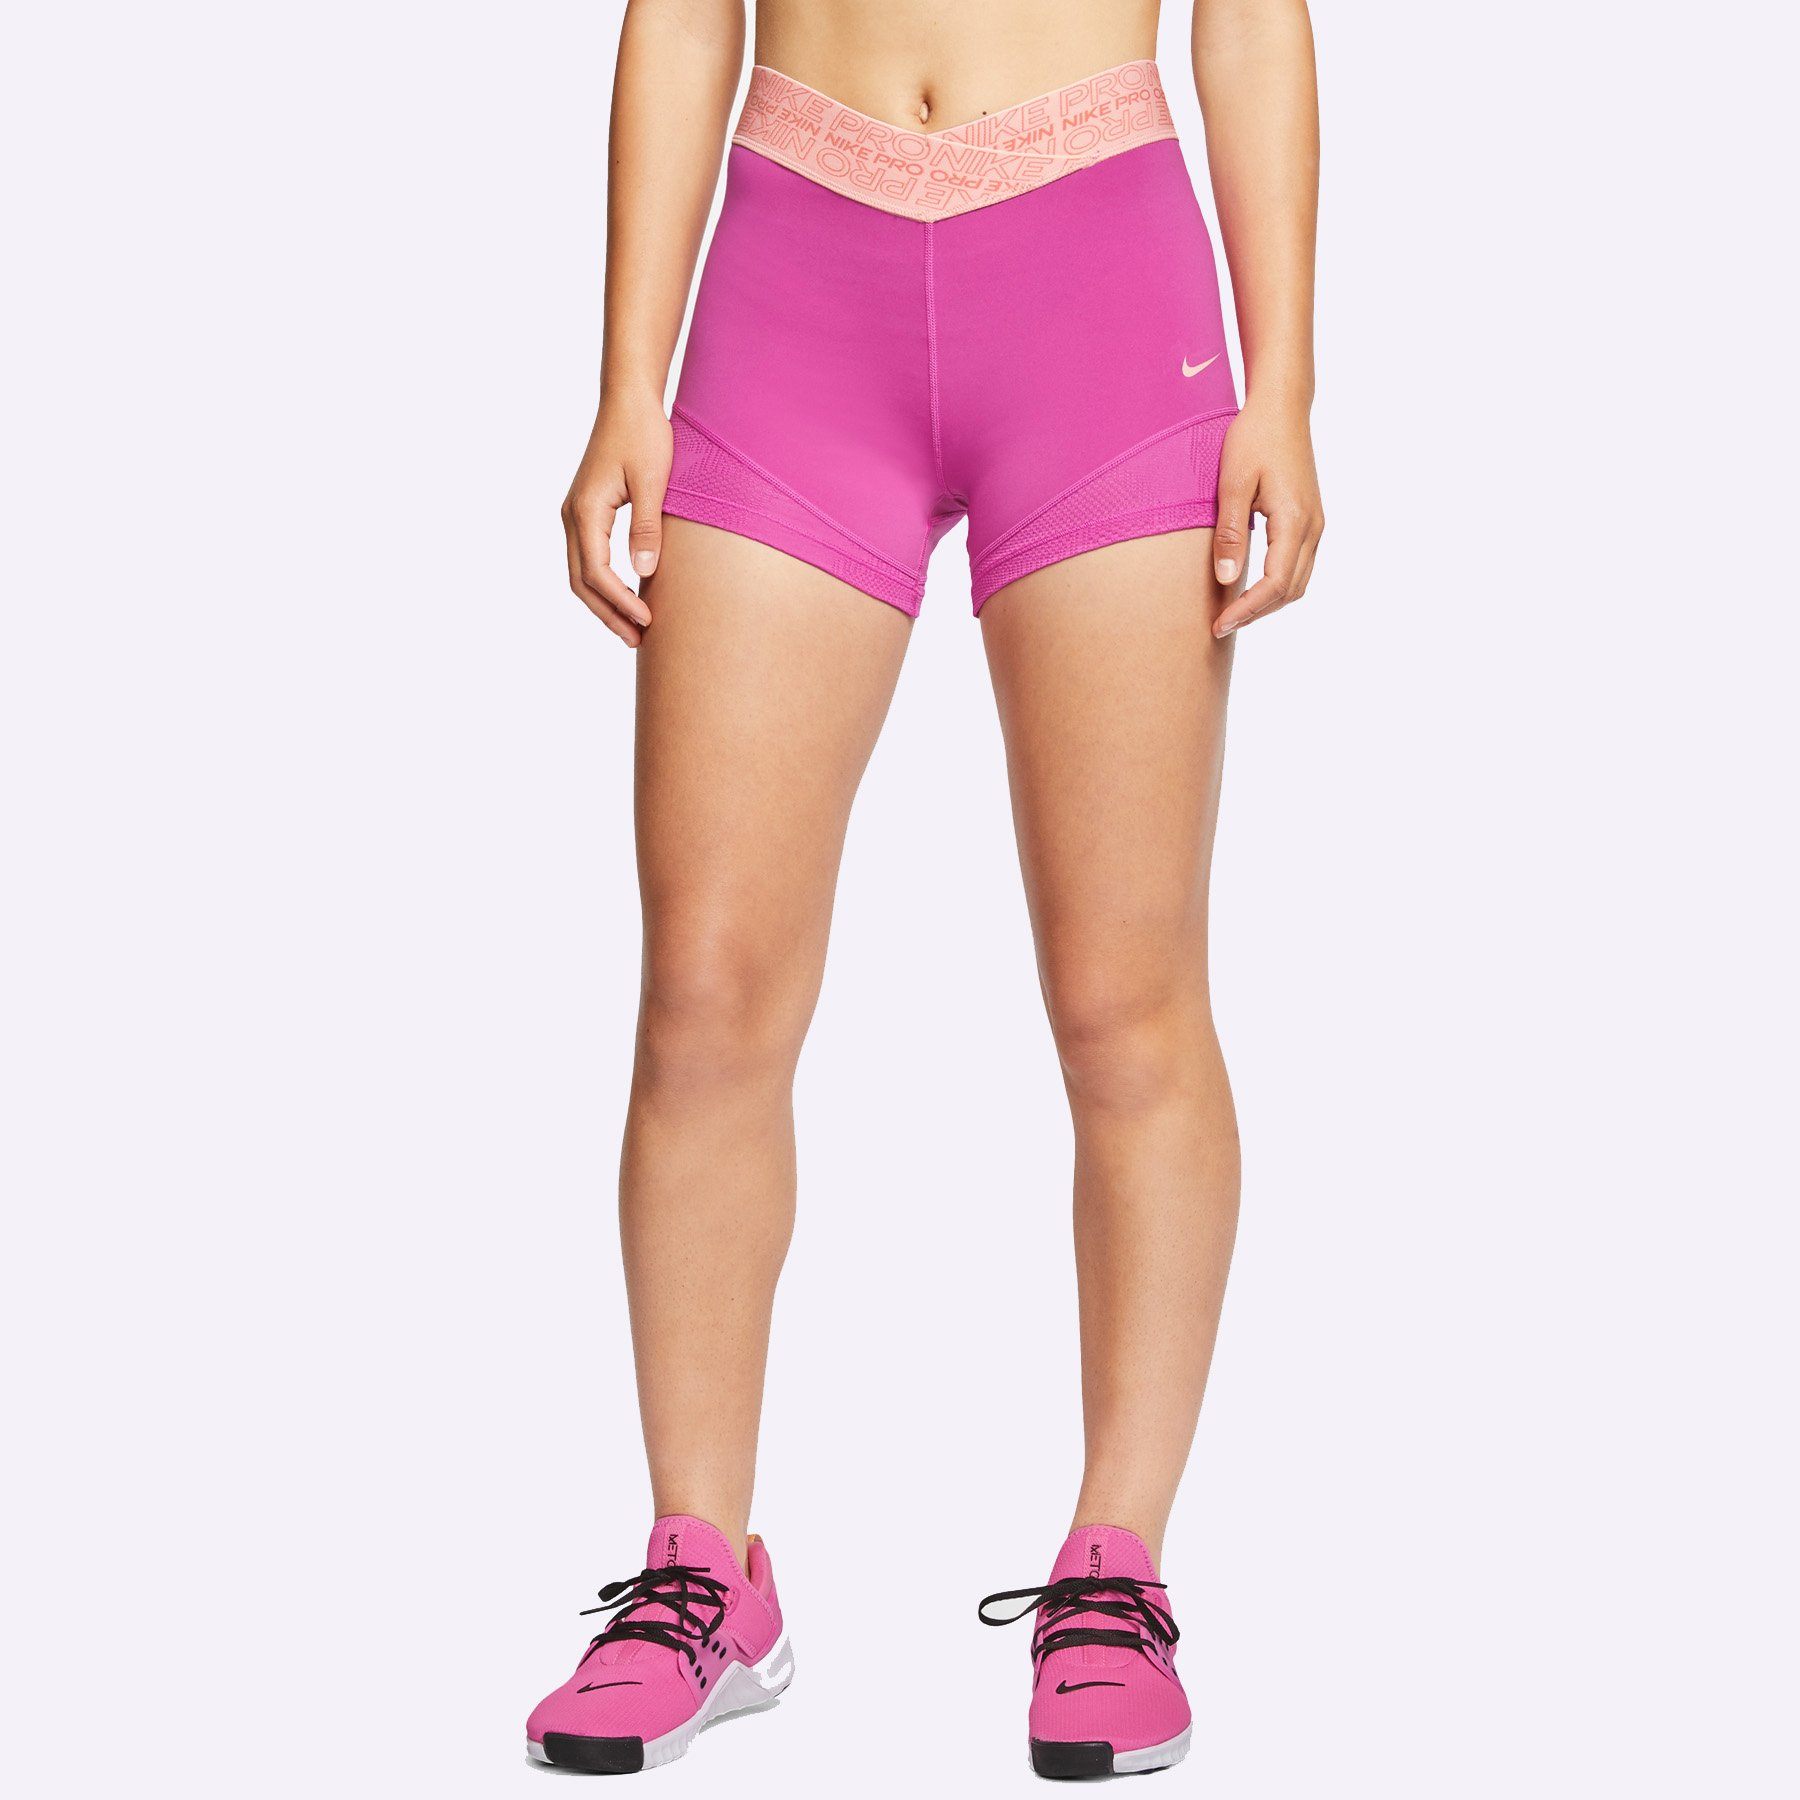 - Pro Women's 3inch Shorts - FIRE PINK/WASHED CORAL foreverspin546546.com